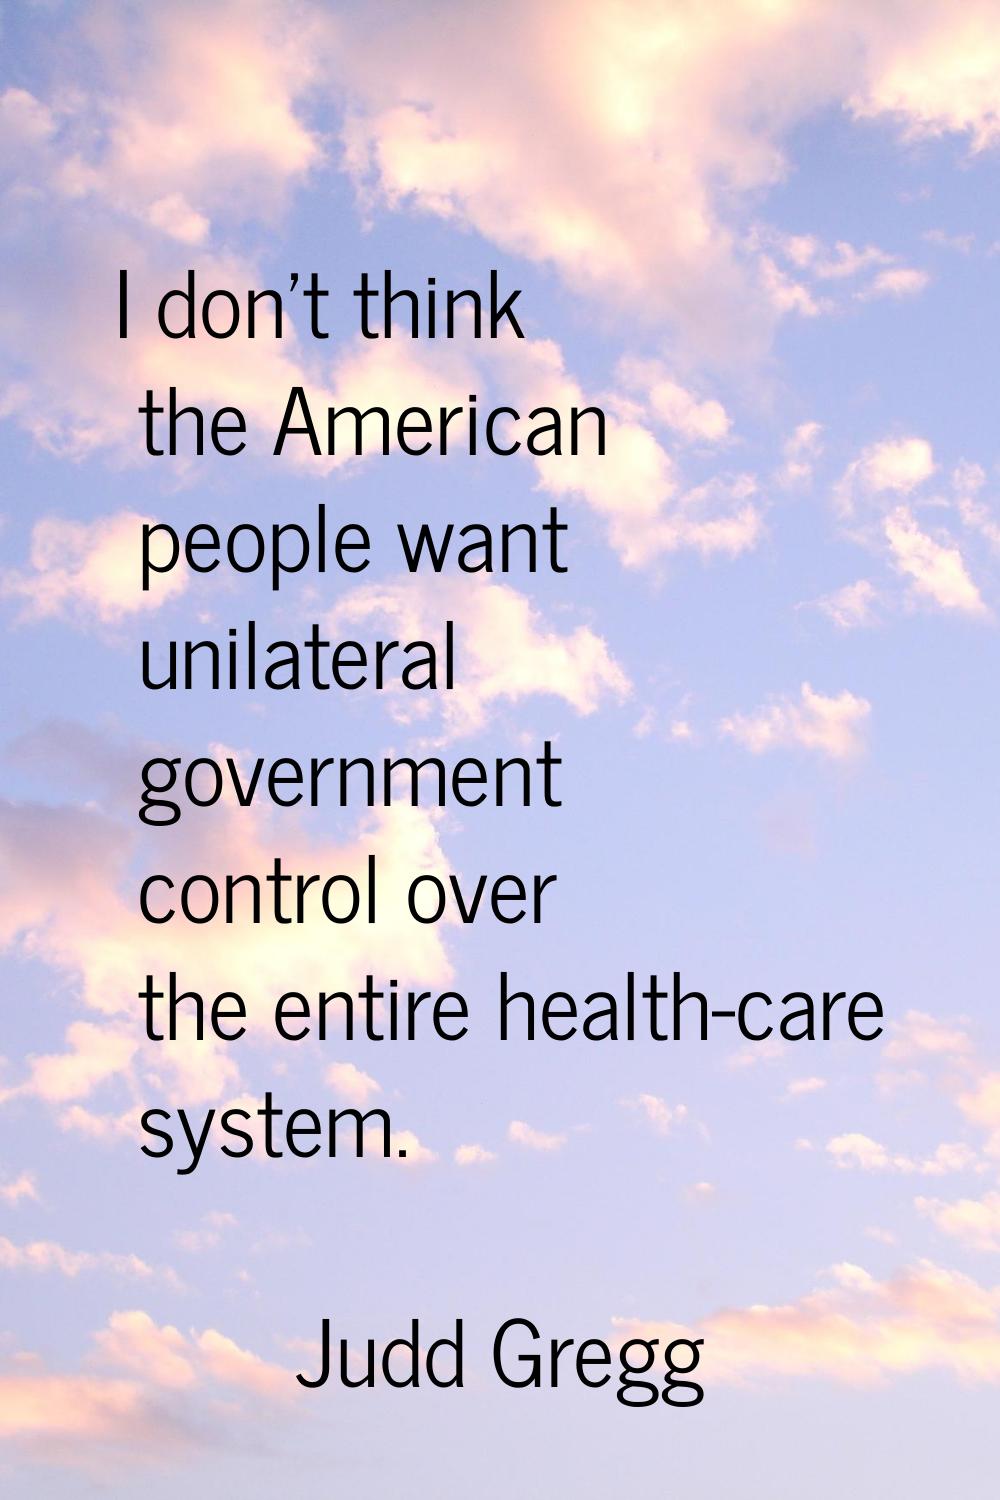 I don't think the American people want unilateral government control over the entire health-care sy